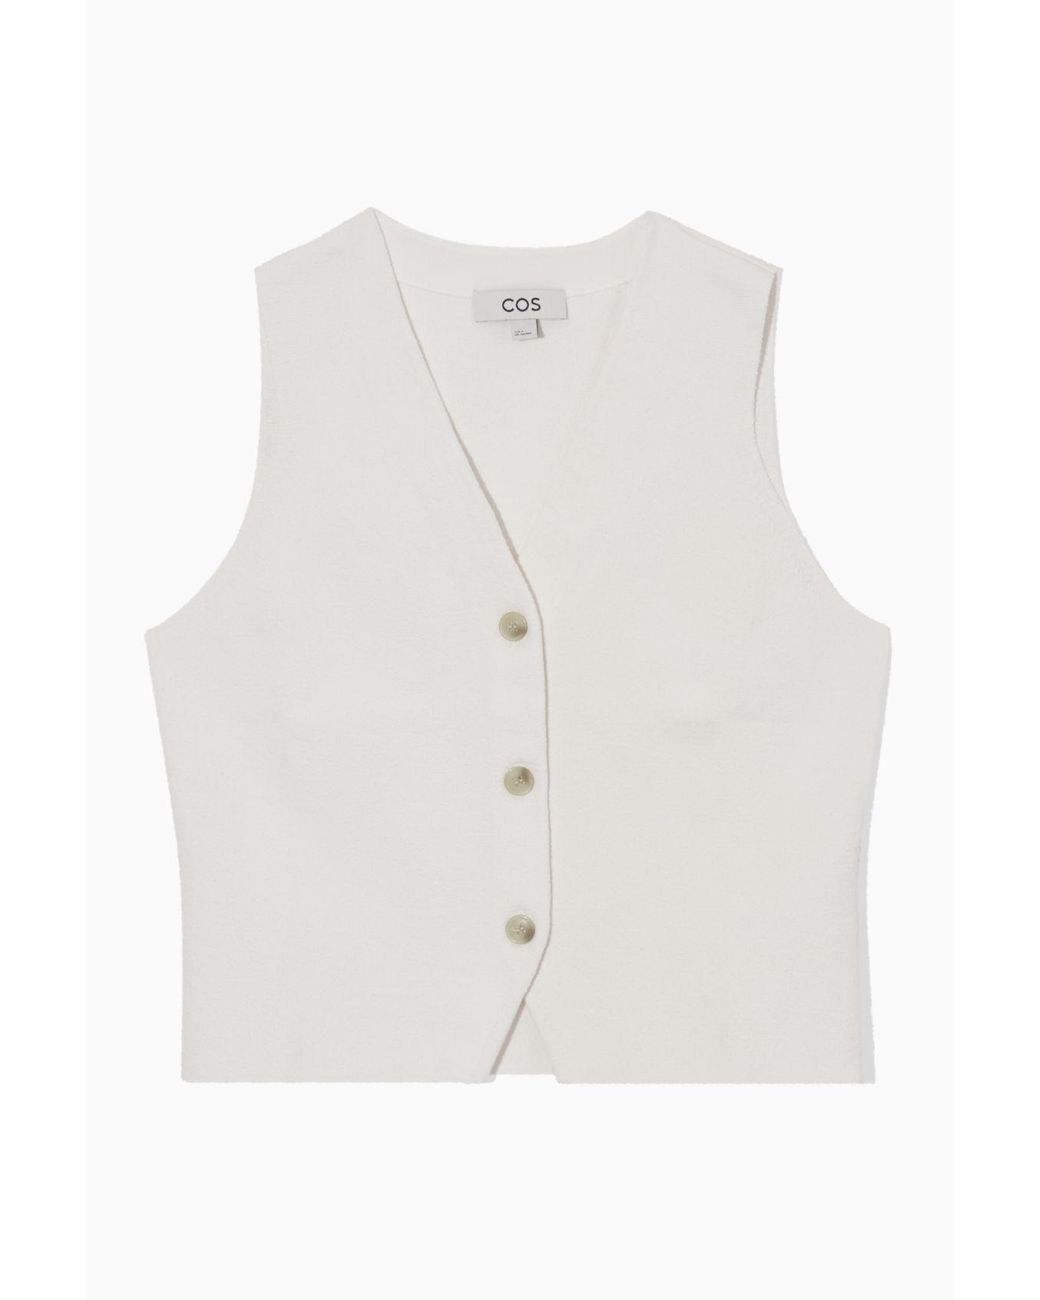 COS Knitted Waistcoat in White | Lyst